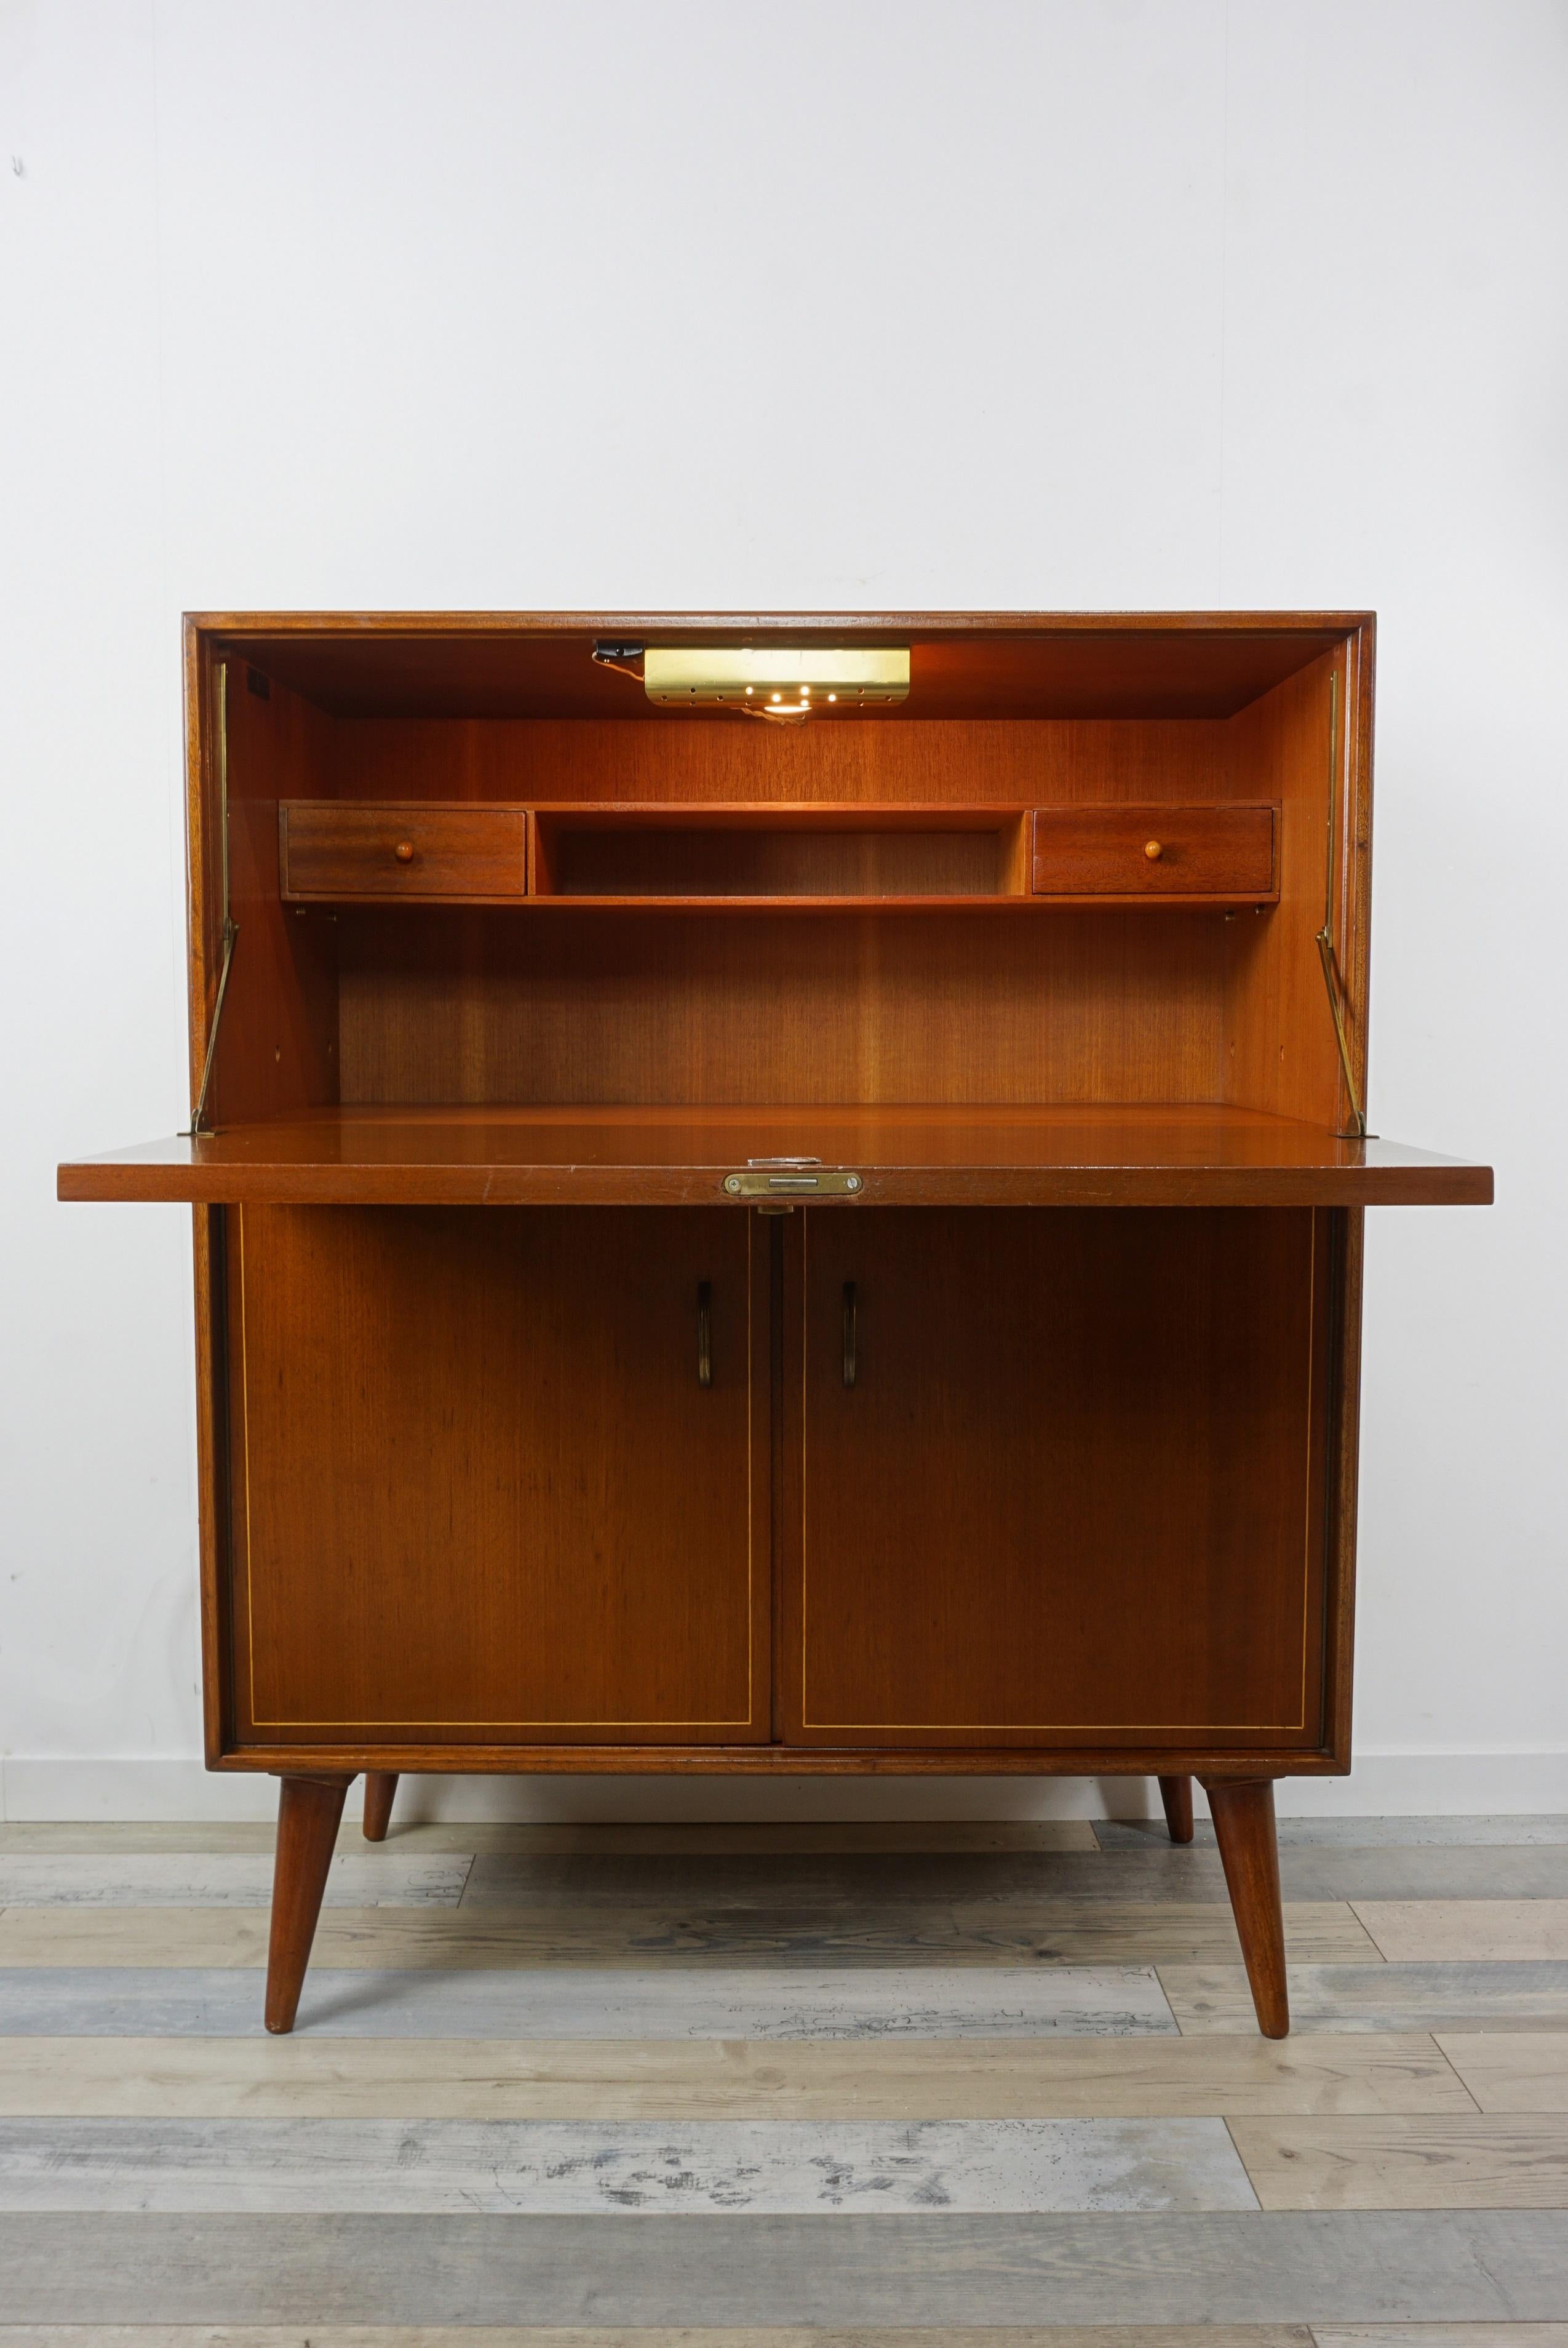 Beautiful cabinet design from the 1950s composed in its lower part of a storage combining, in its upper part, beautiful storage spaces with bar or an adorable wall secretary). Practical and design, Scandinavian style undeniable!